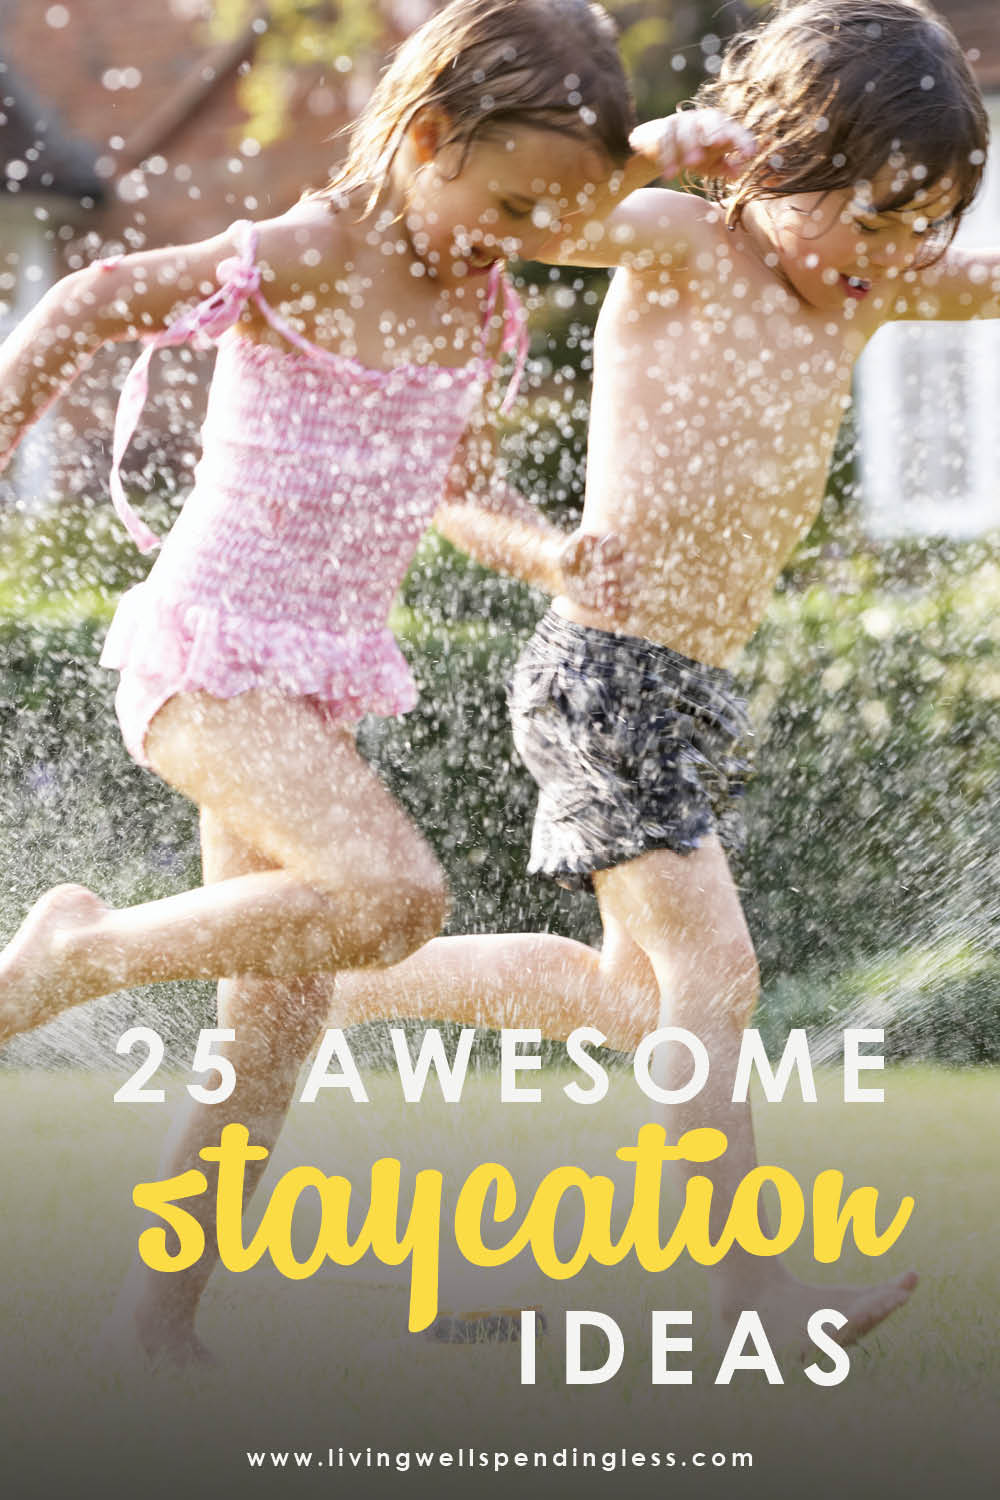 Think a family getaway means going far away? These 25 awesome ideas for vacationing right in your own hometown might just change your mind! Awesome Staycation Ideas | Staycation Tips | Staycation Planning | Family Getaways | Family Activities | Family Vacations #staycationtips #staycation #familyactivities #familyvacations 